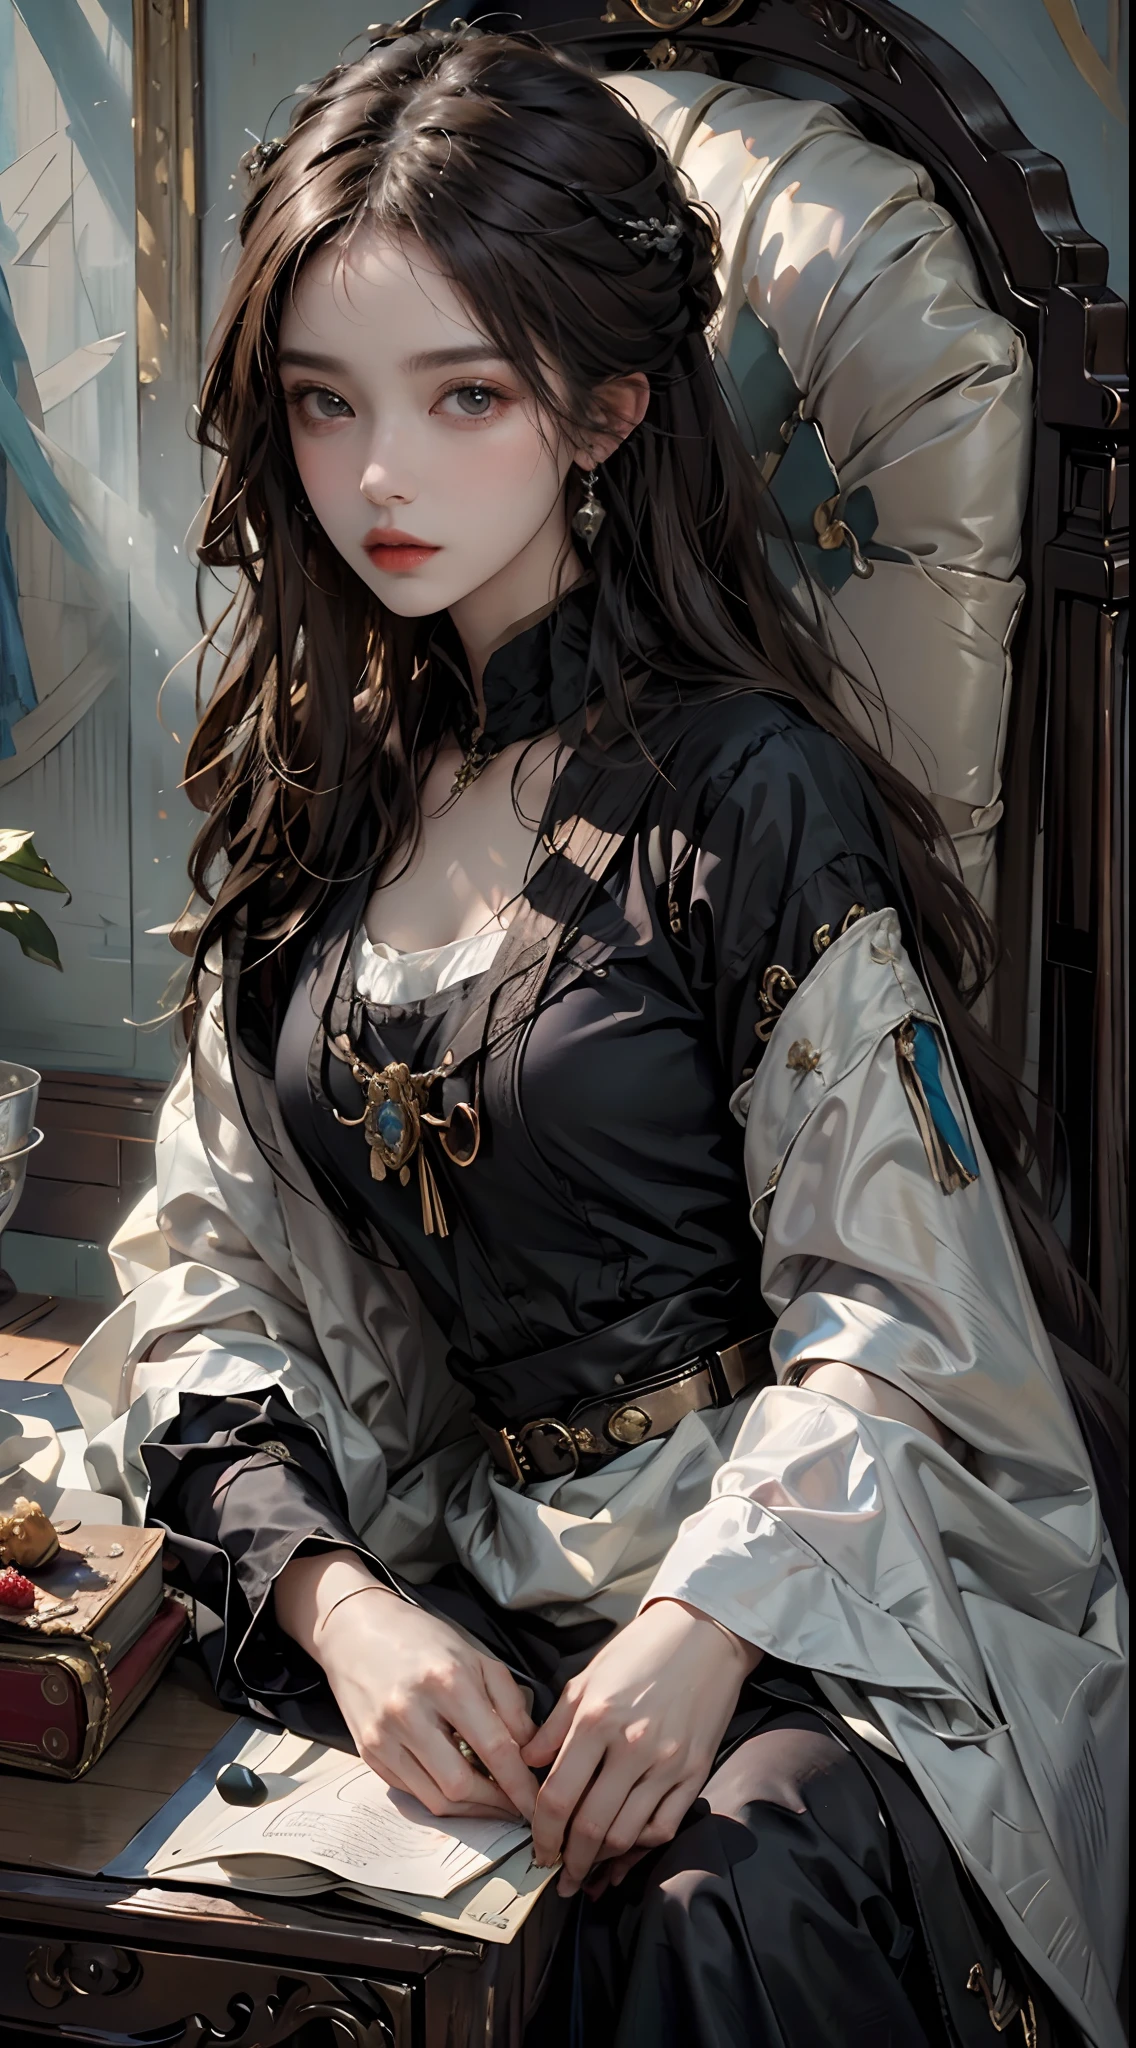 ((Masterpiece oil painting, Highest quality)), beautiful girl wearing renaissance clothing sitting at dressing table, chiaroscuro, light and shadow.